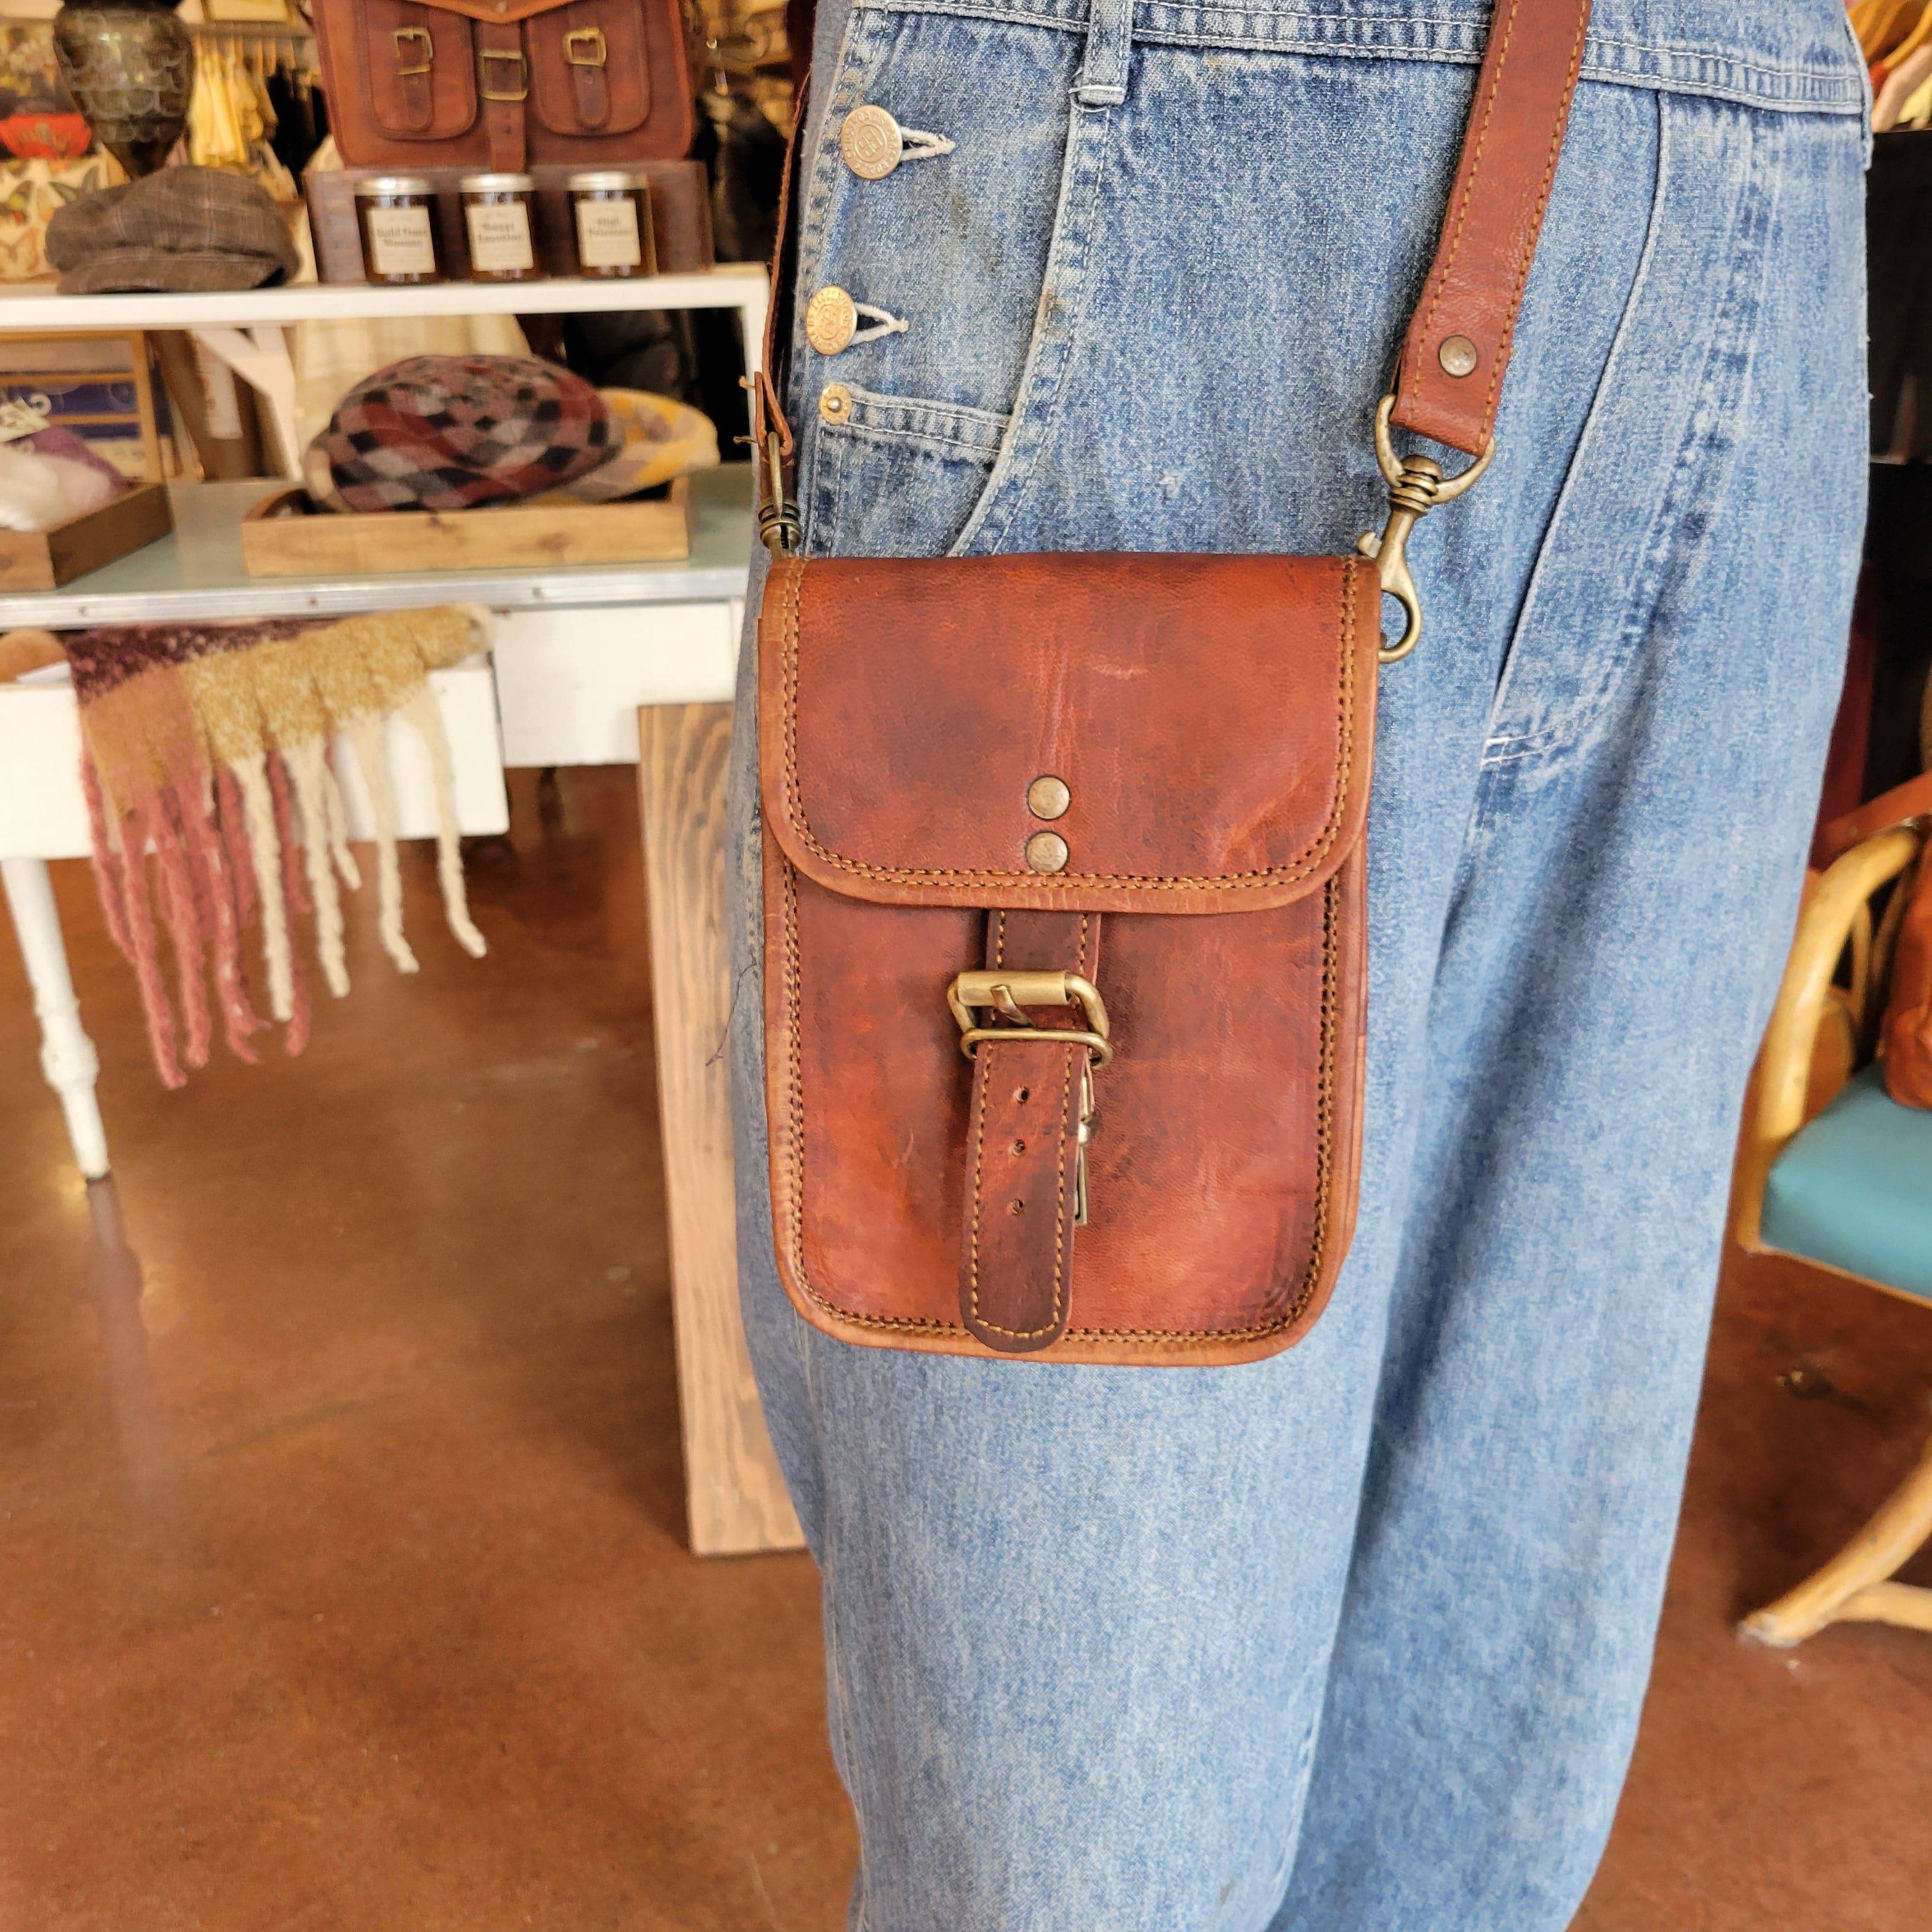 7" TALL LEATHER SATCHEL - Out of the Blue